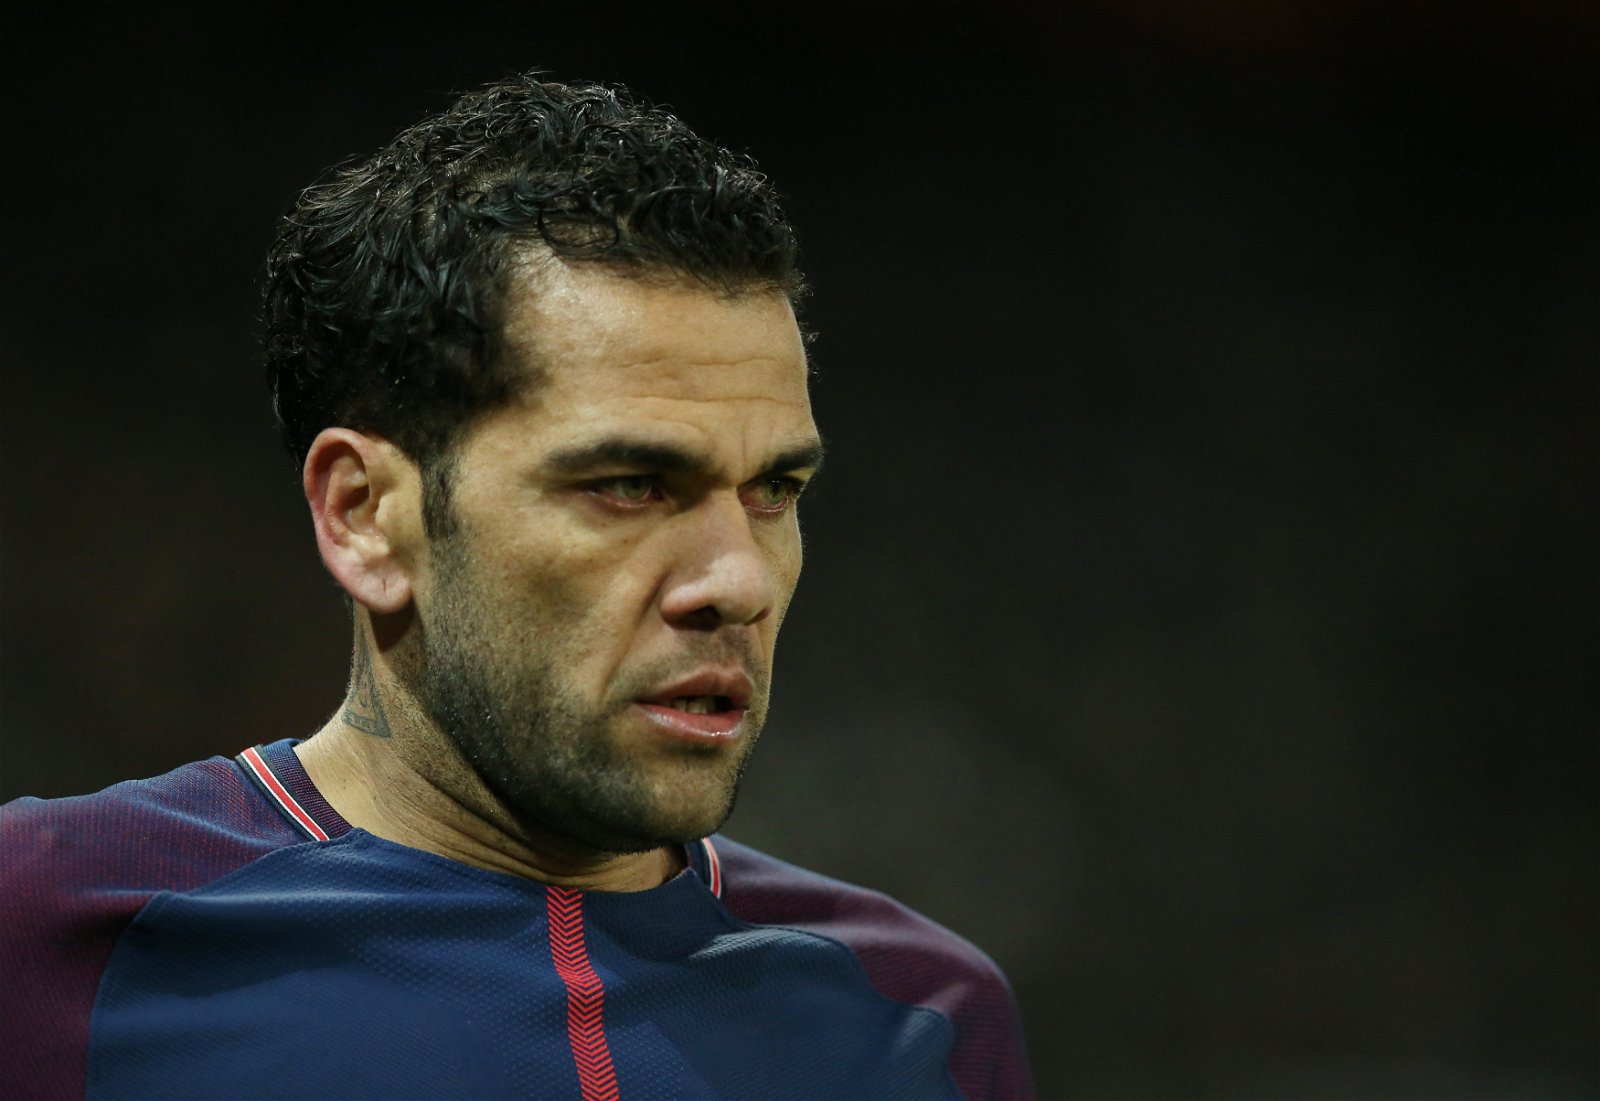 Dani Alves is one of the Top Ten Best Right Backs in World Football 2018/2019